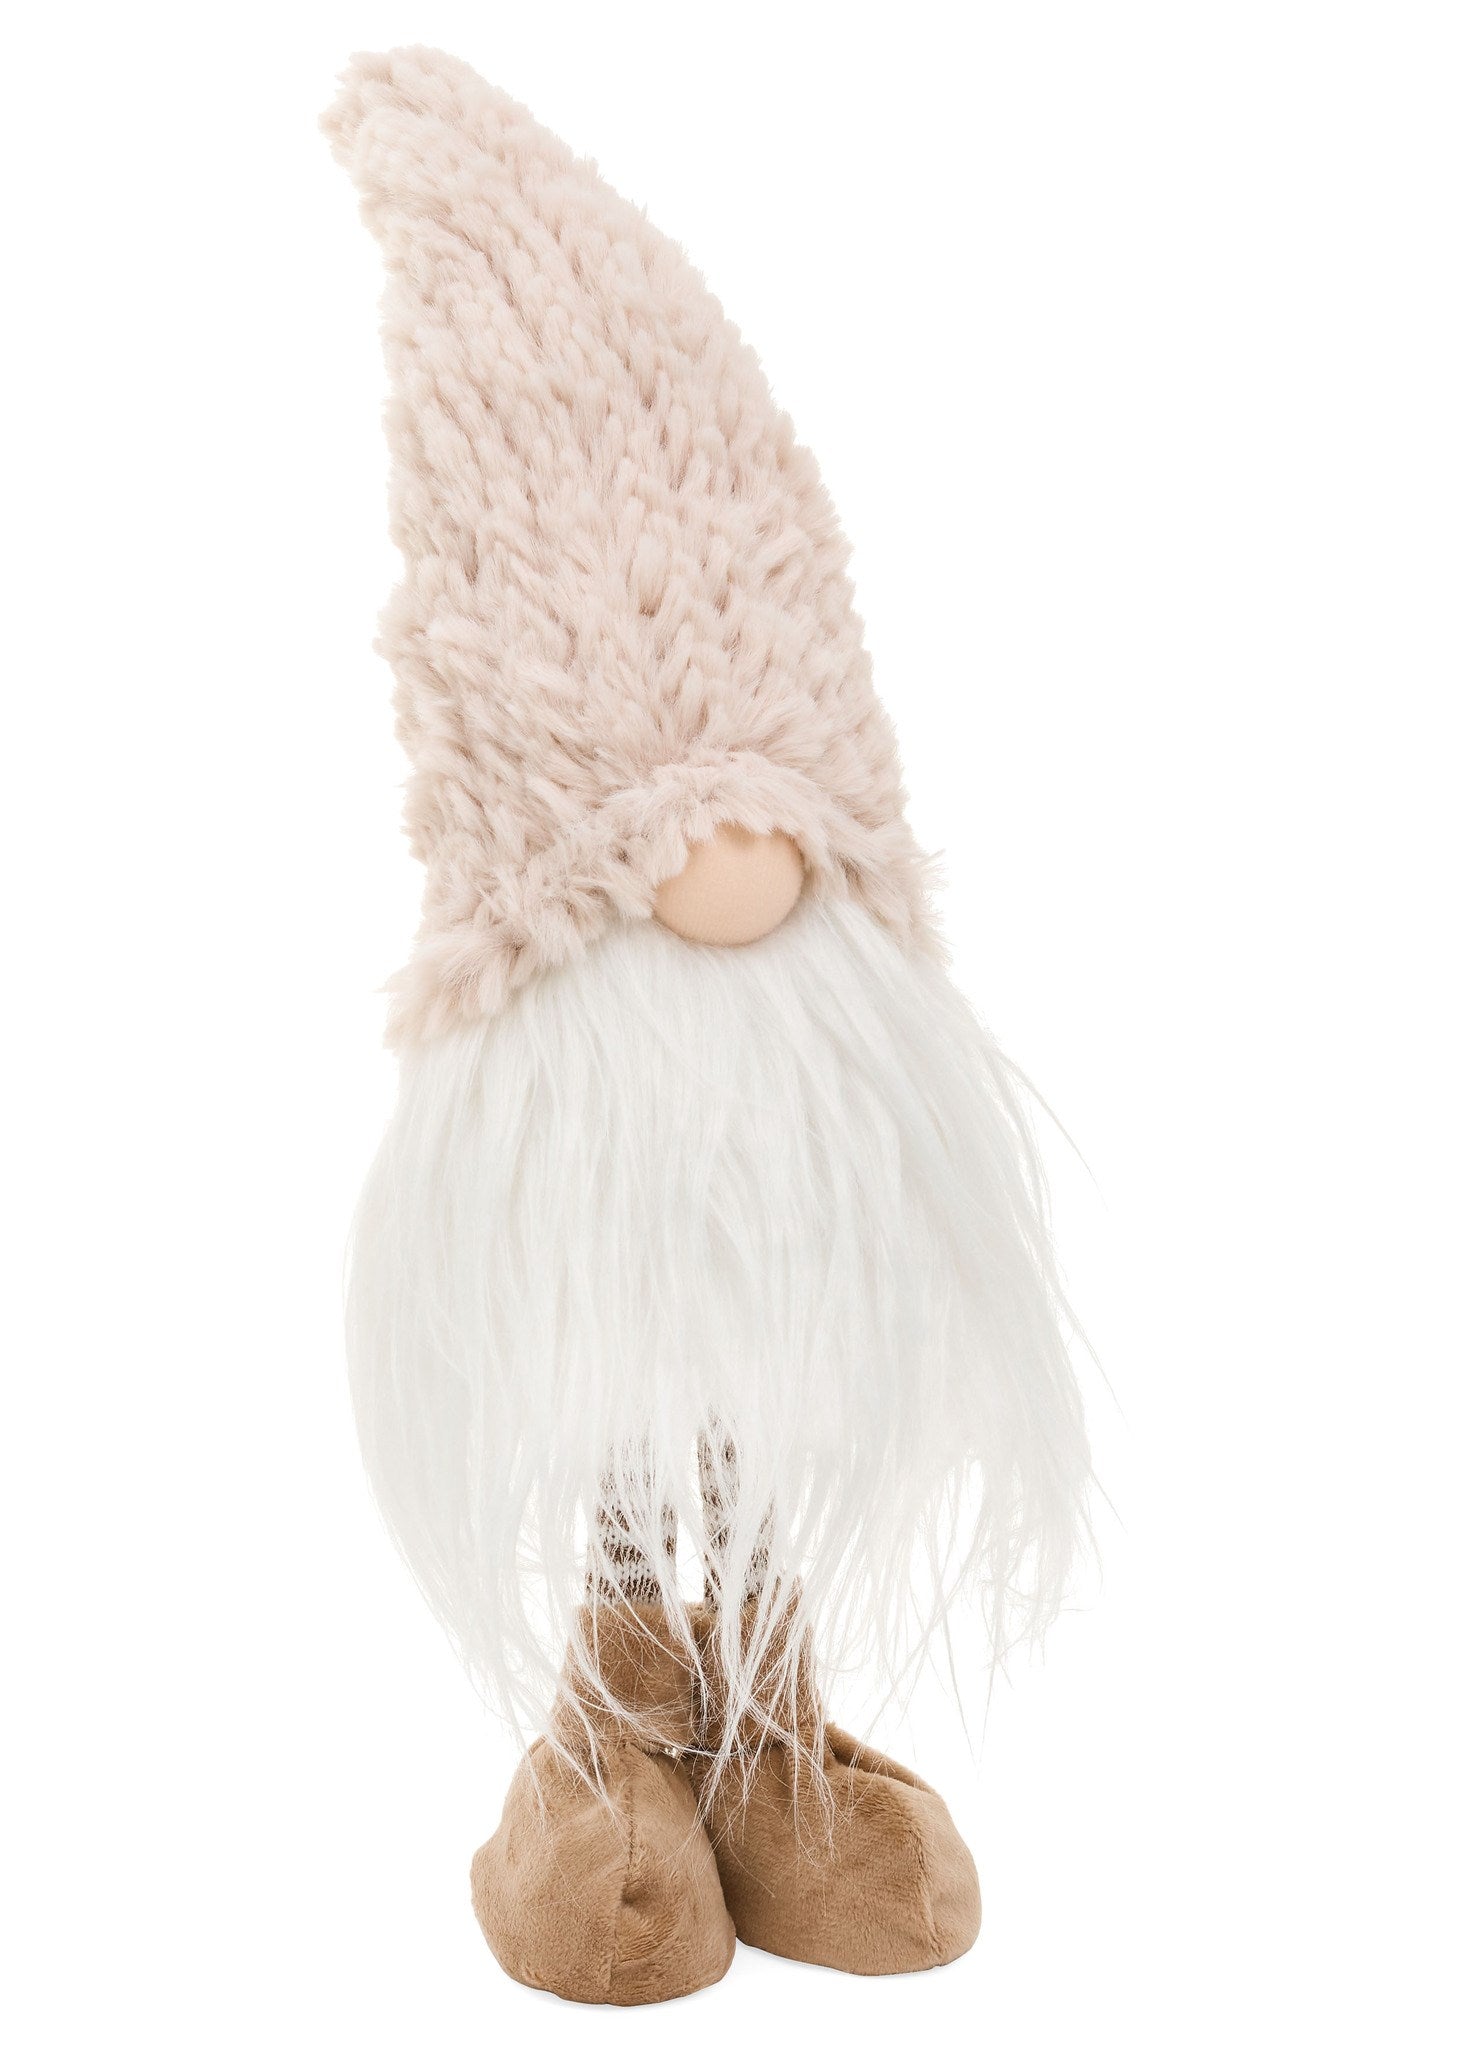 Standing Gnome with Beige Knit Hat